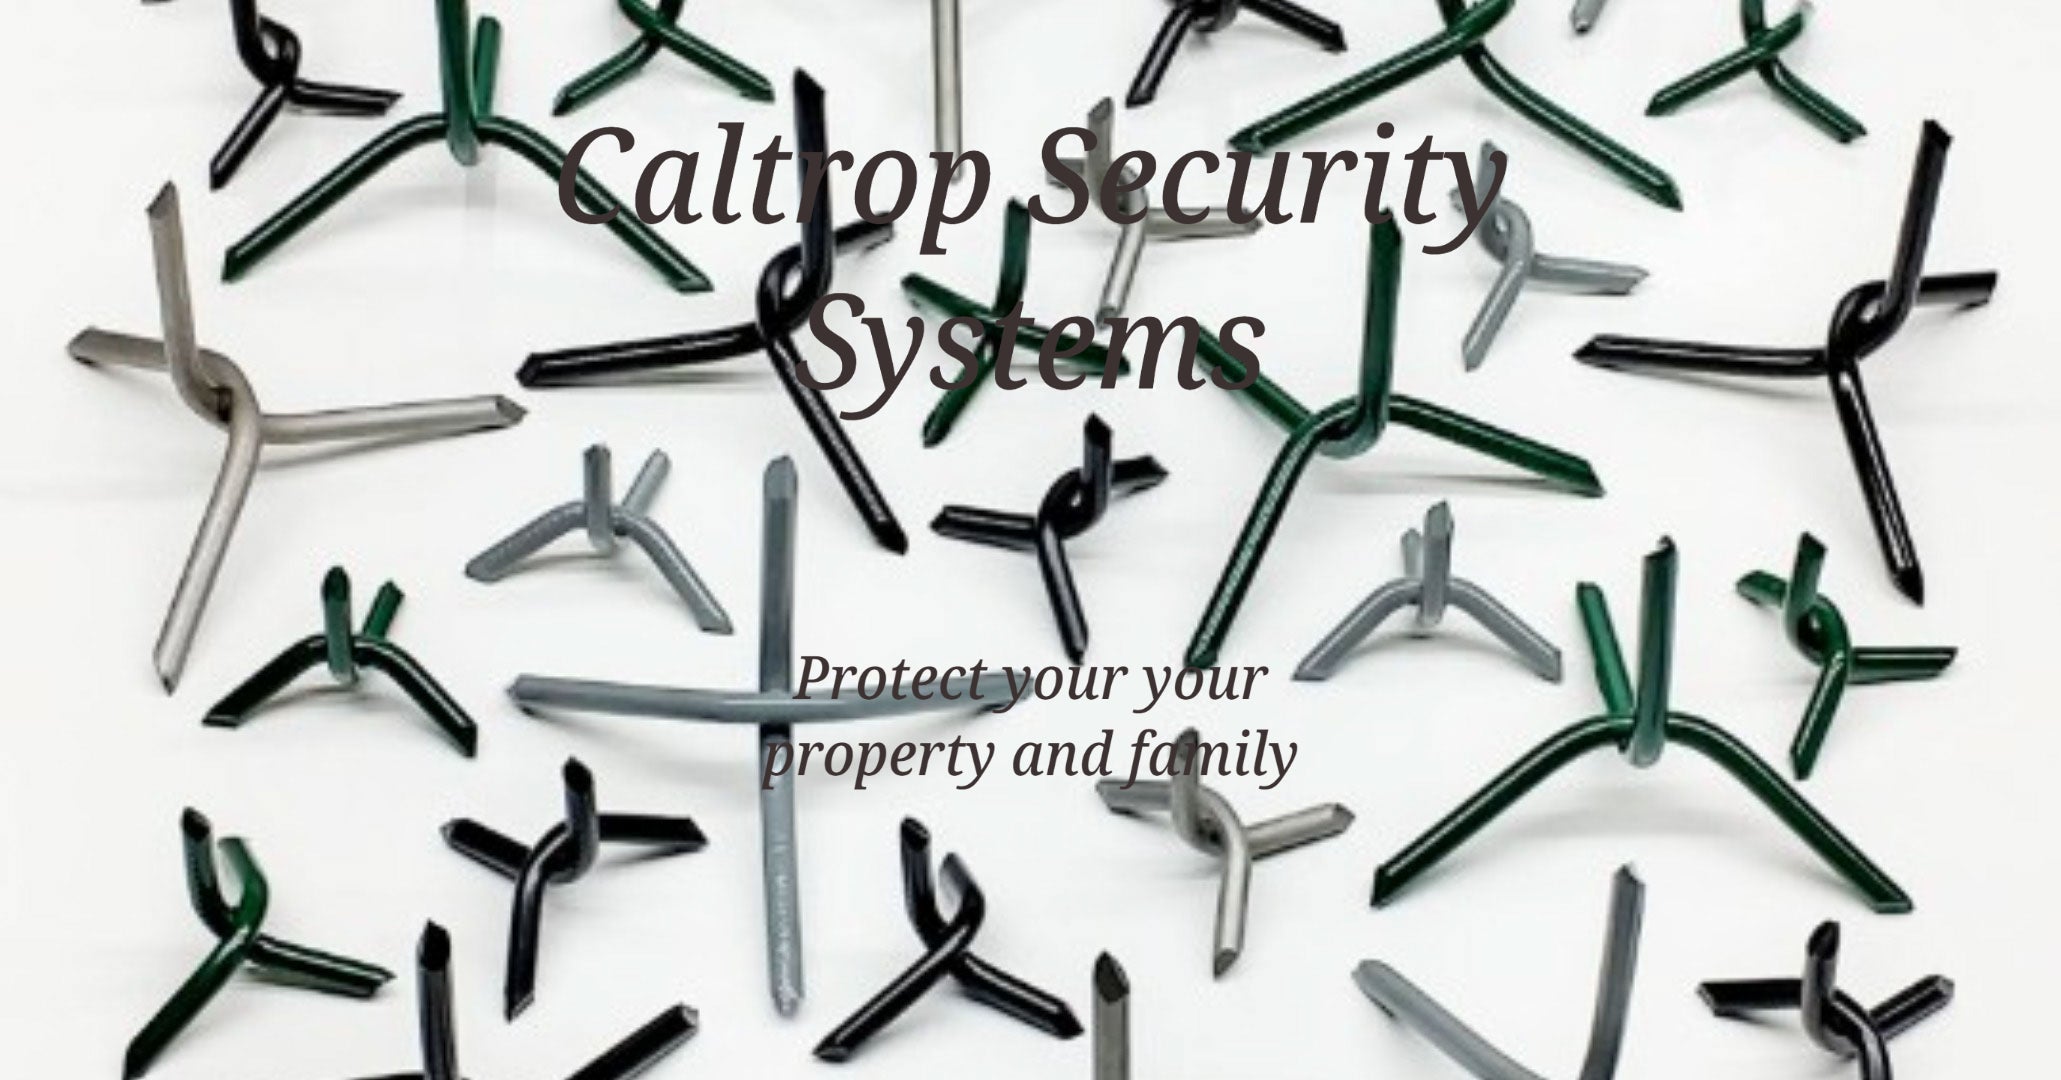 Caltrop Security Systems